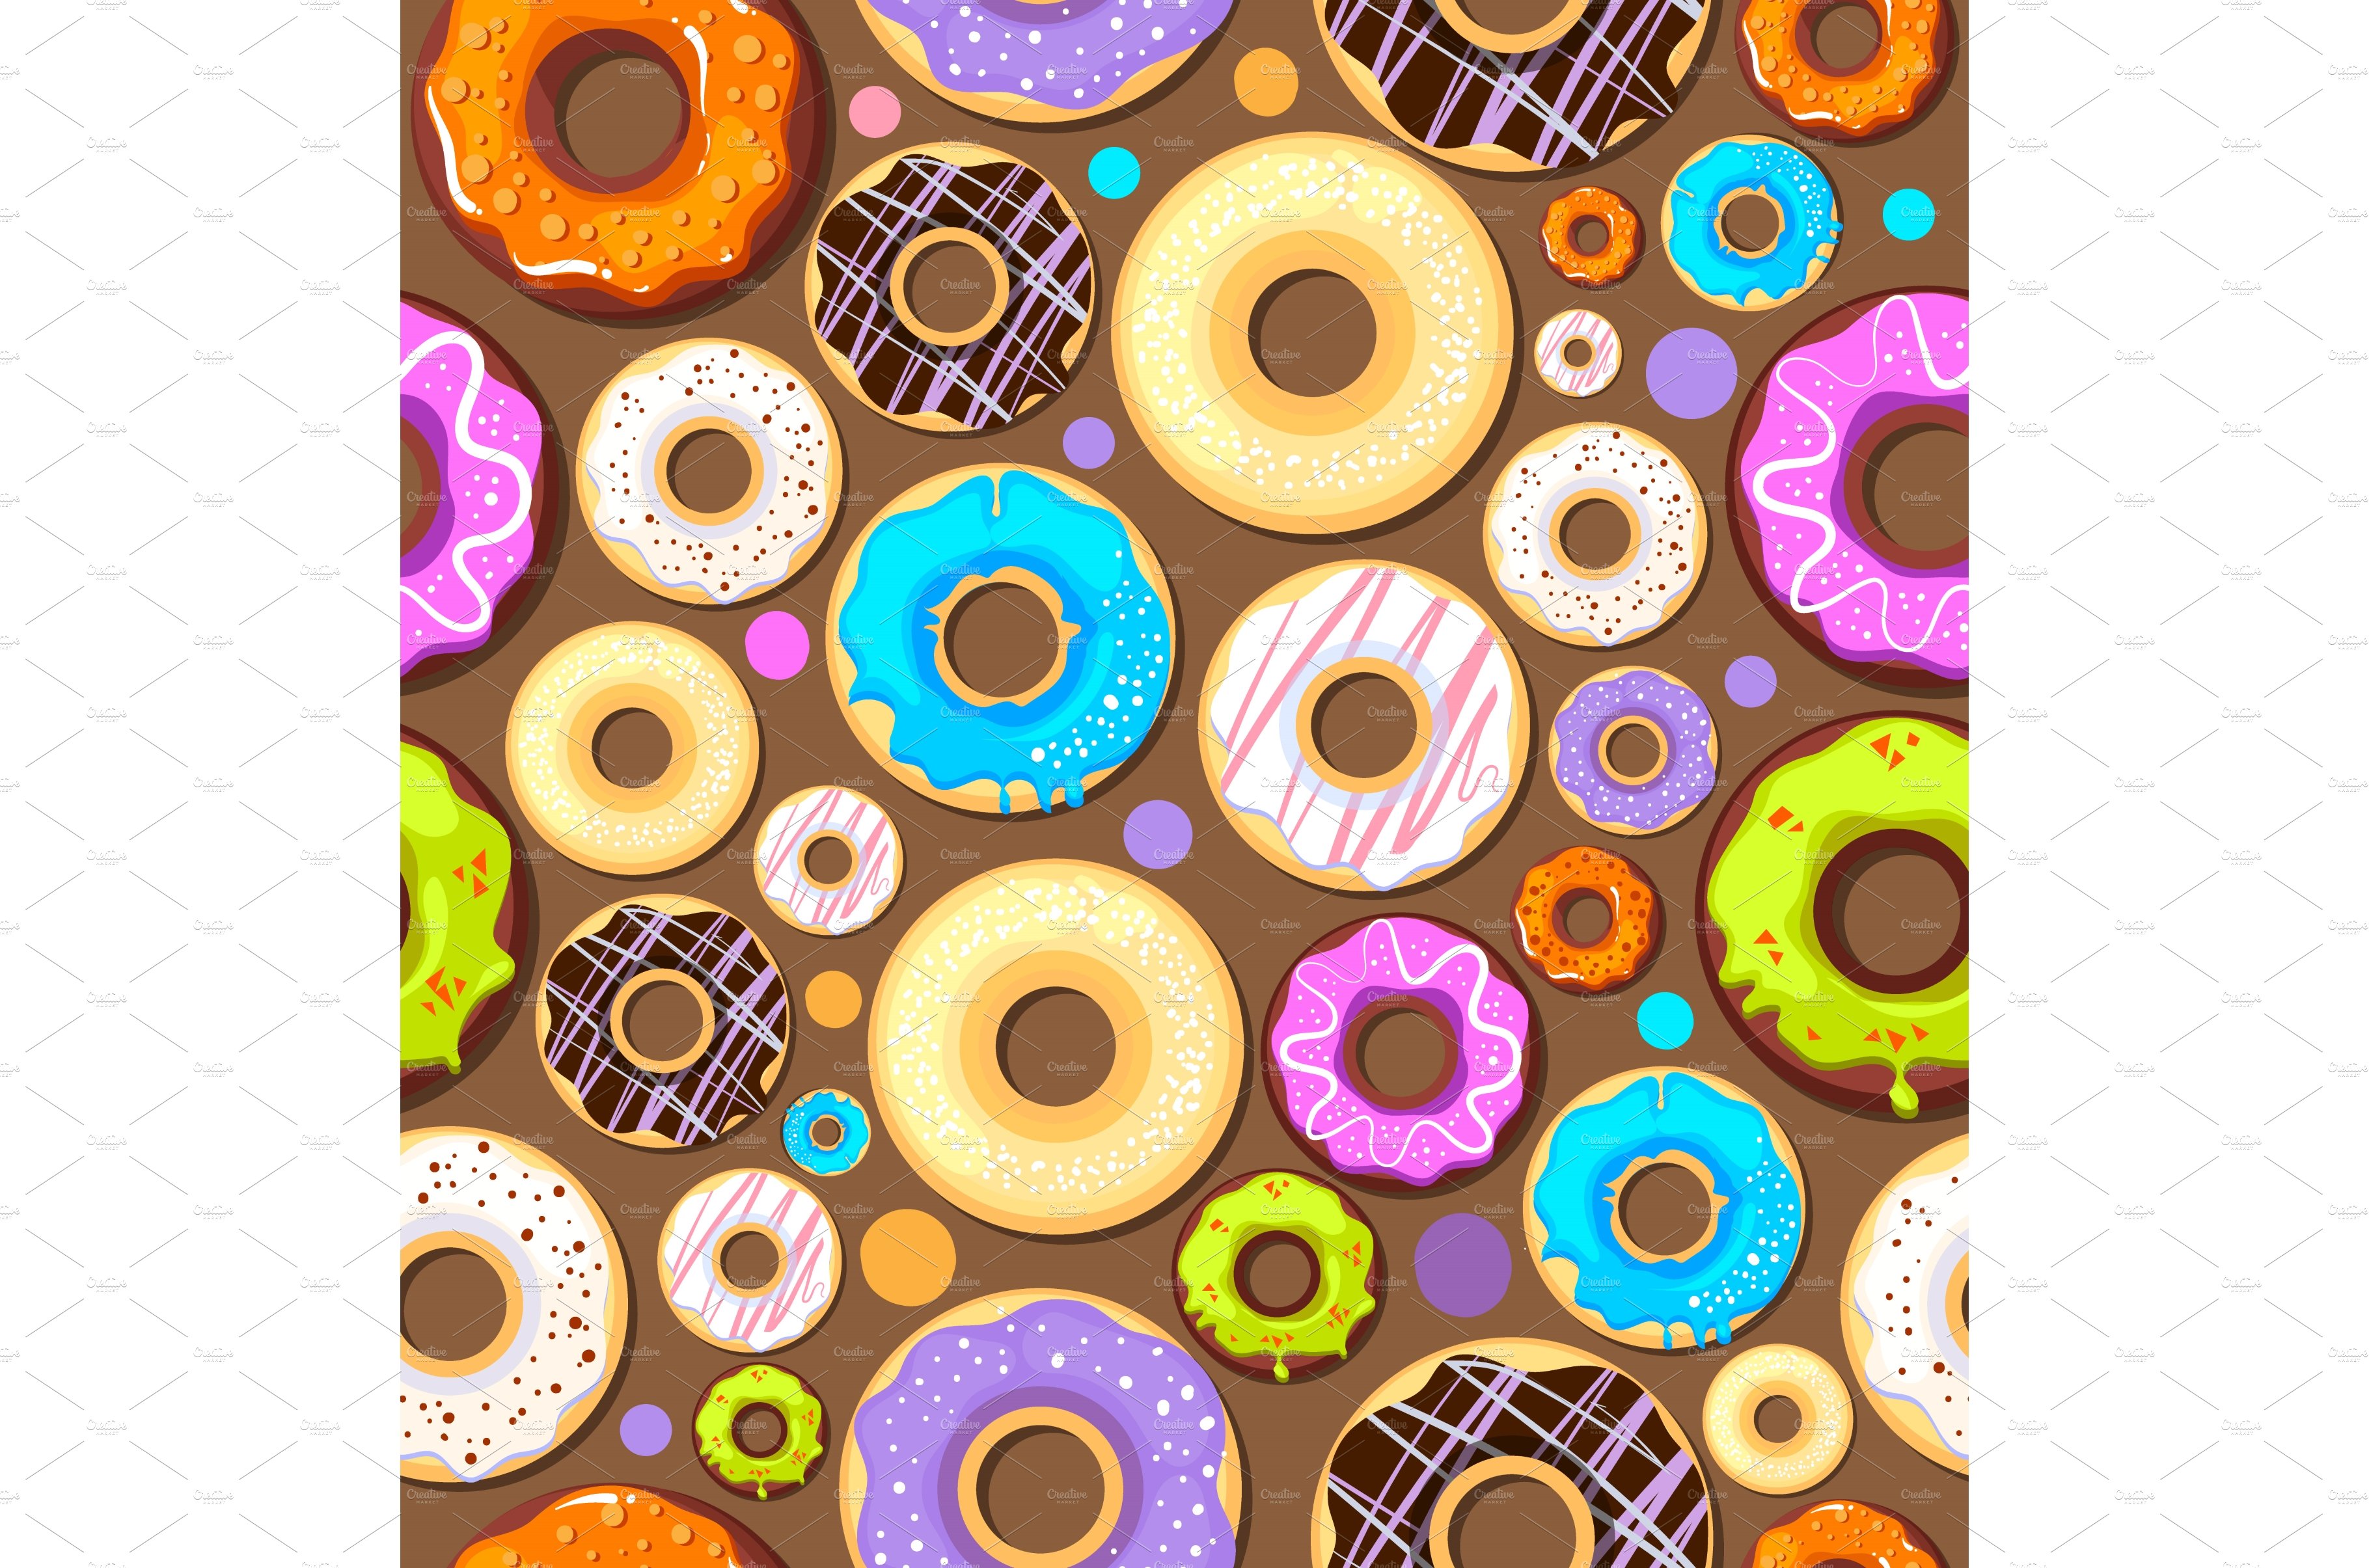 donuts pattern. tasty pastries round cover image.